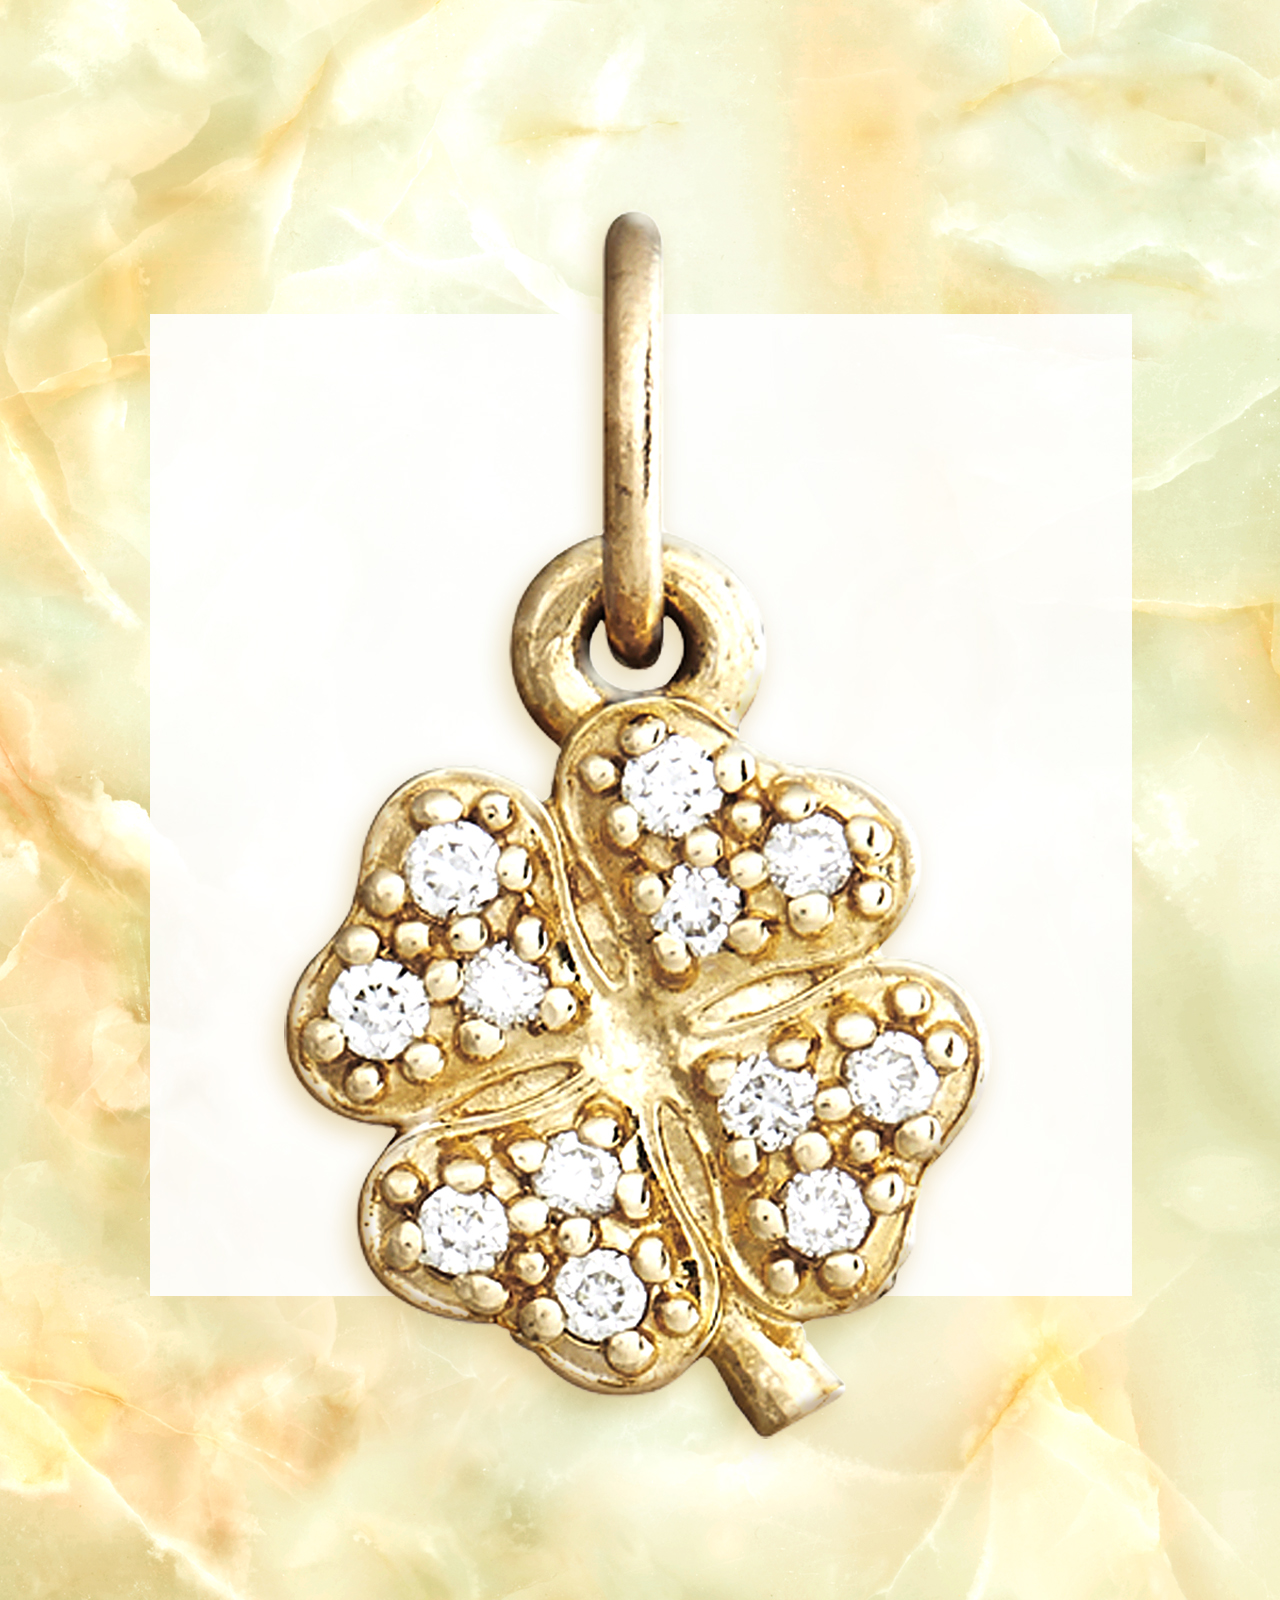 Round cut diamonds set within a yellow gold four leaf clover charm pendant from Helen Ficalora